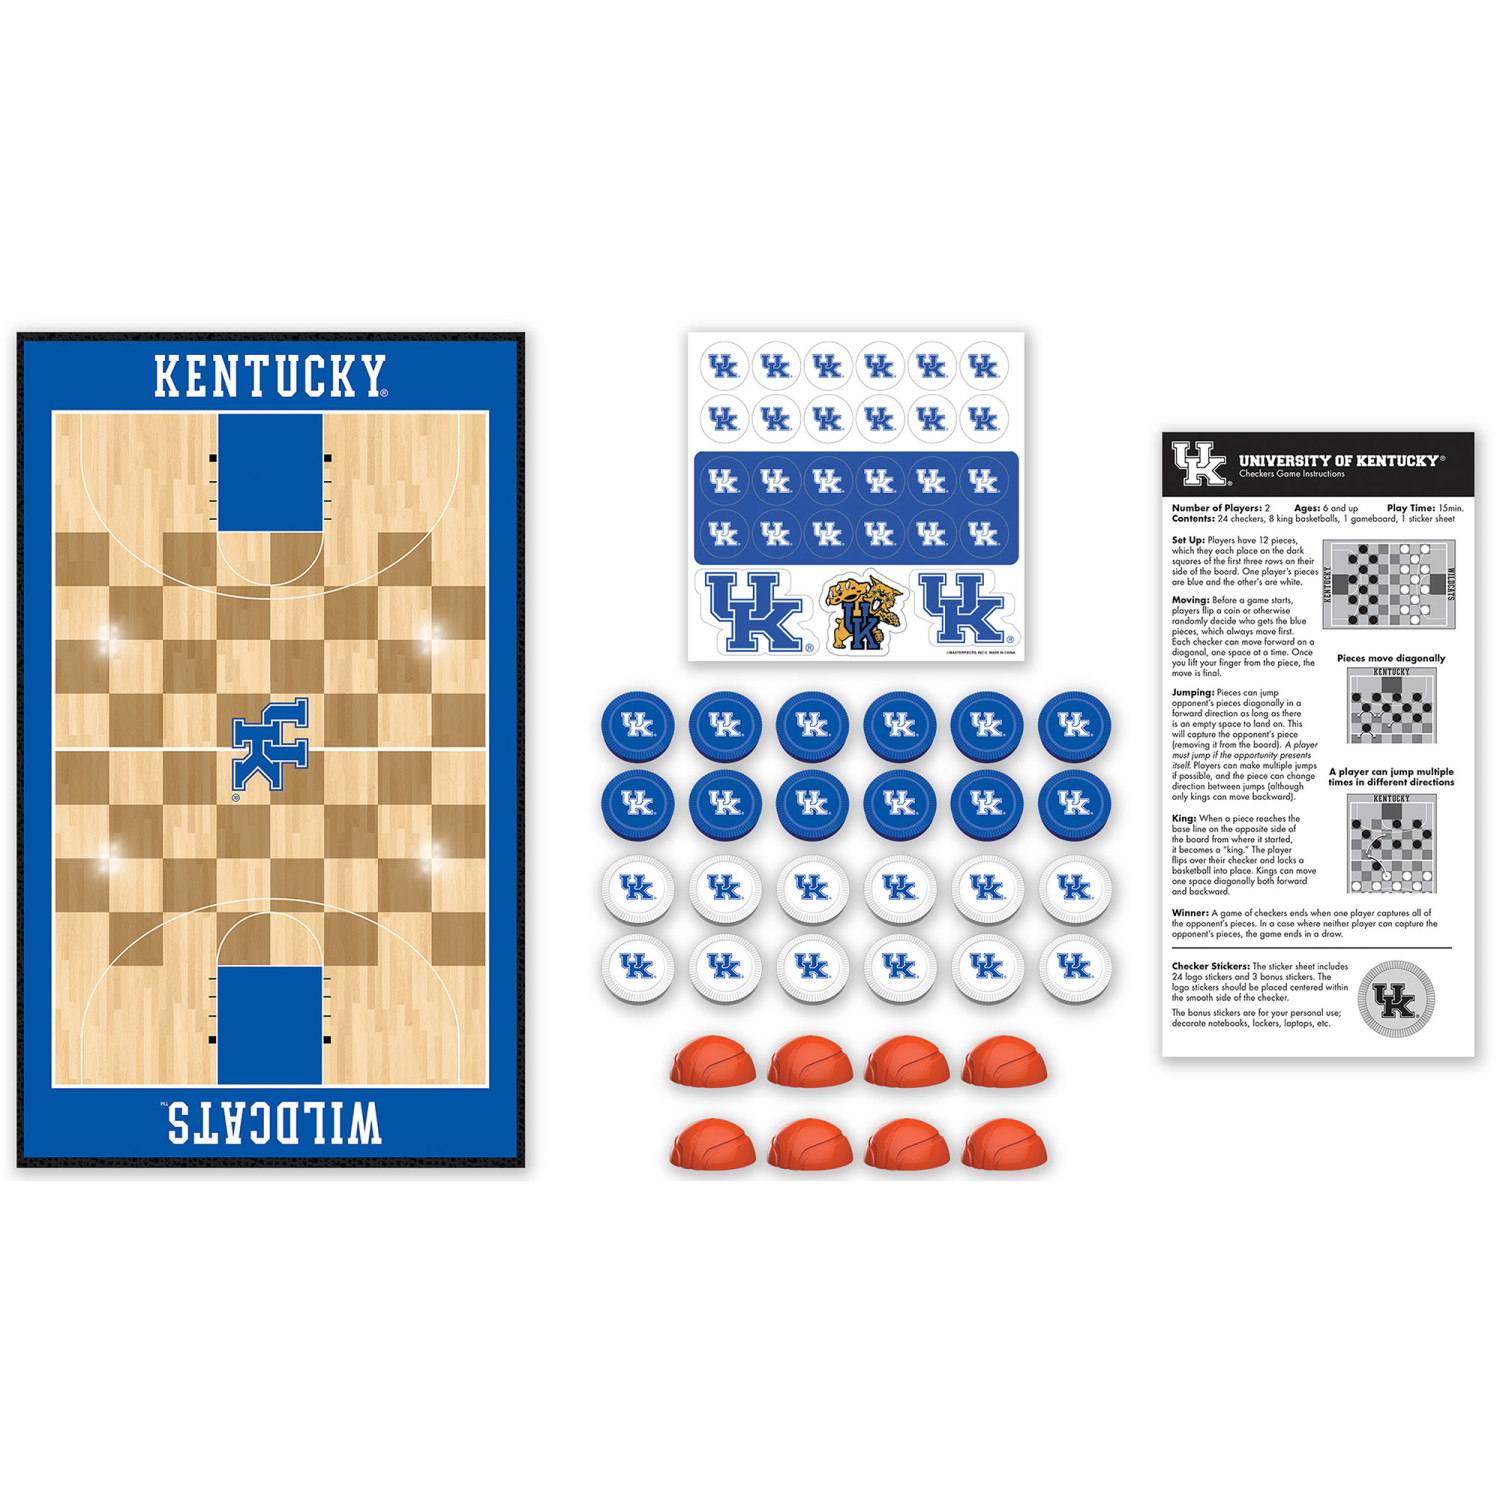 MasterPieces Officially licensed NCAA Kentucky Wildcats Checkers Board Game for Families and Kids ages 6 and Up - image 3 of 5